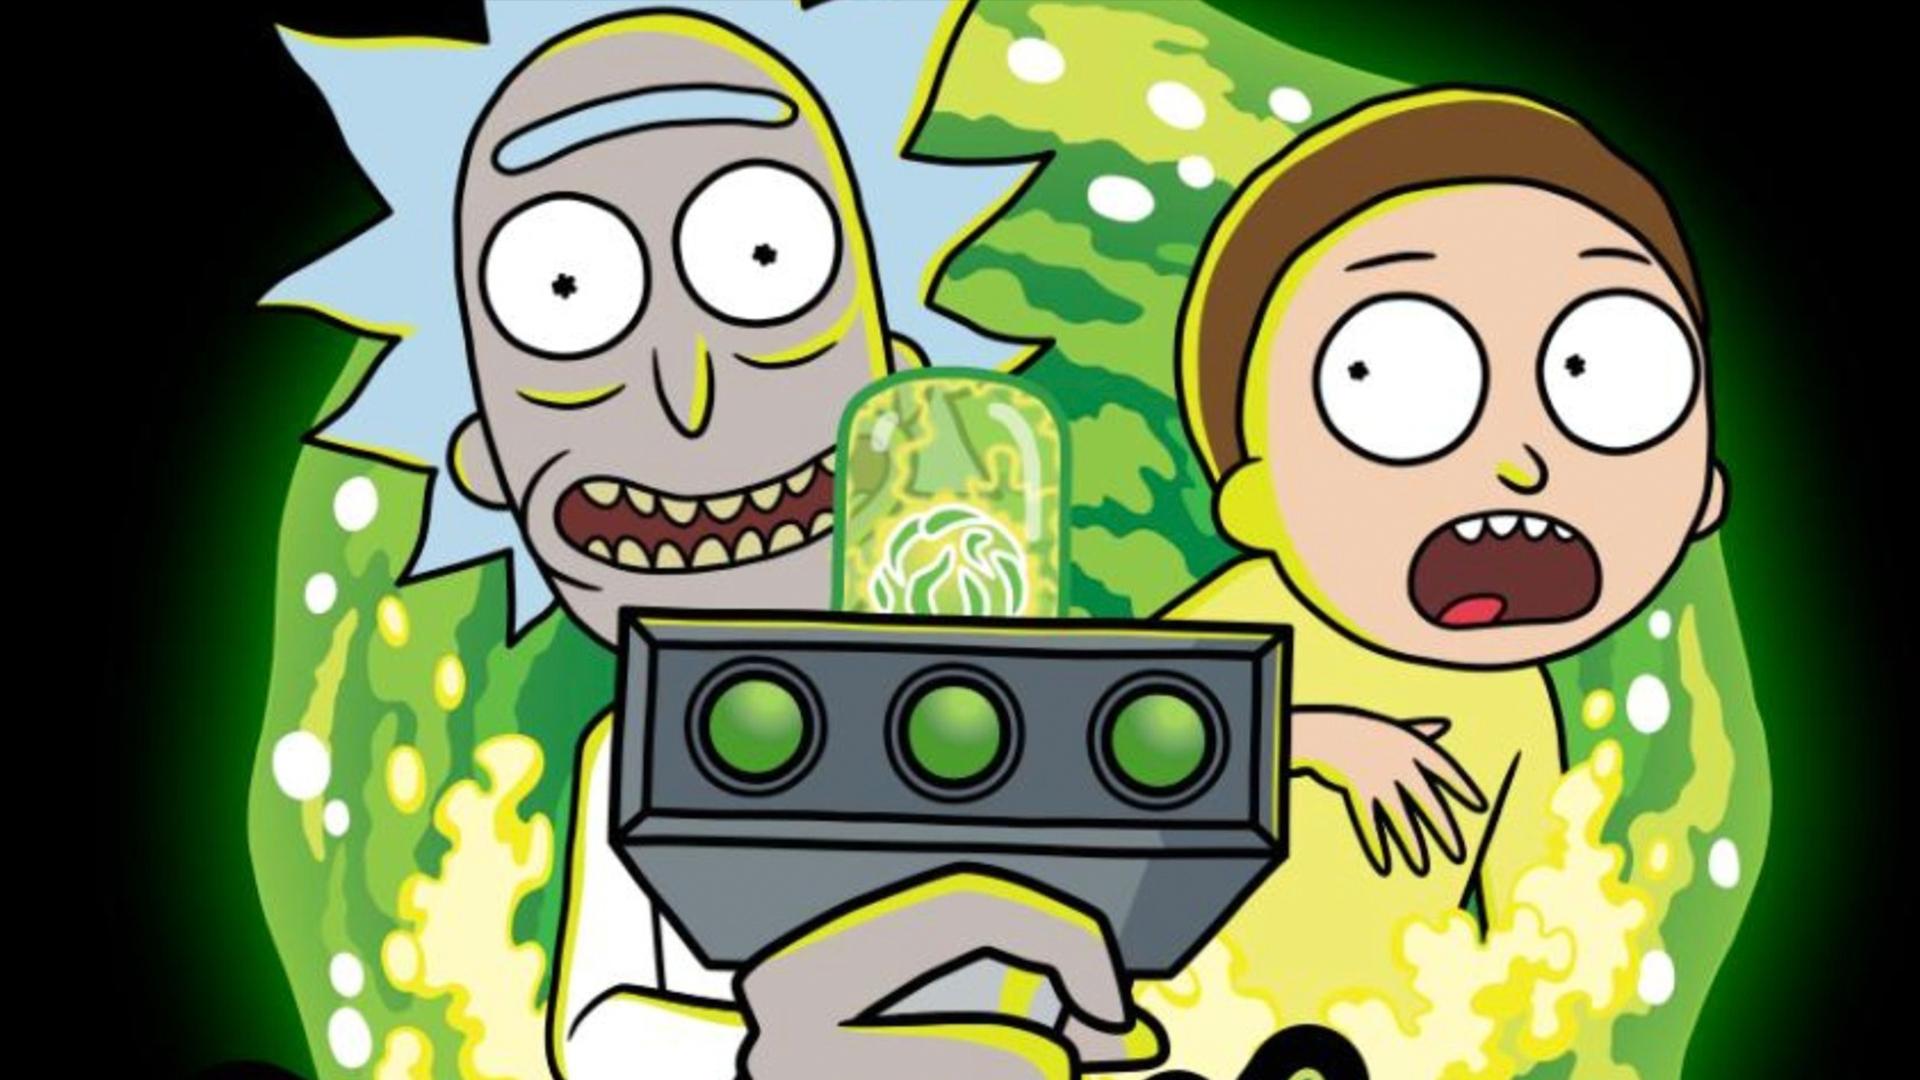 Season 4 of 'Rick and Morty' to premiere in November